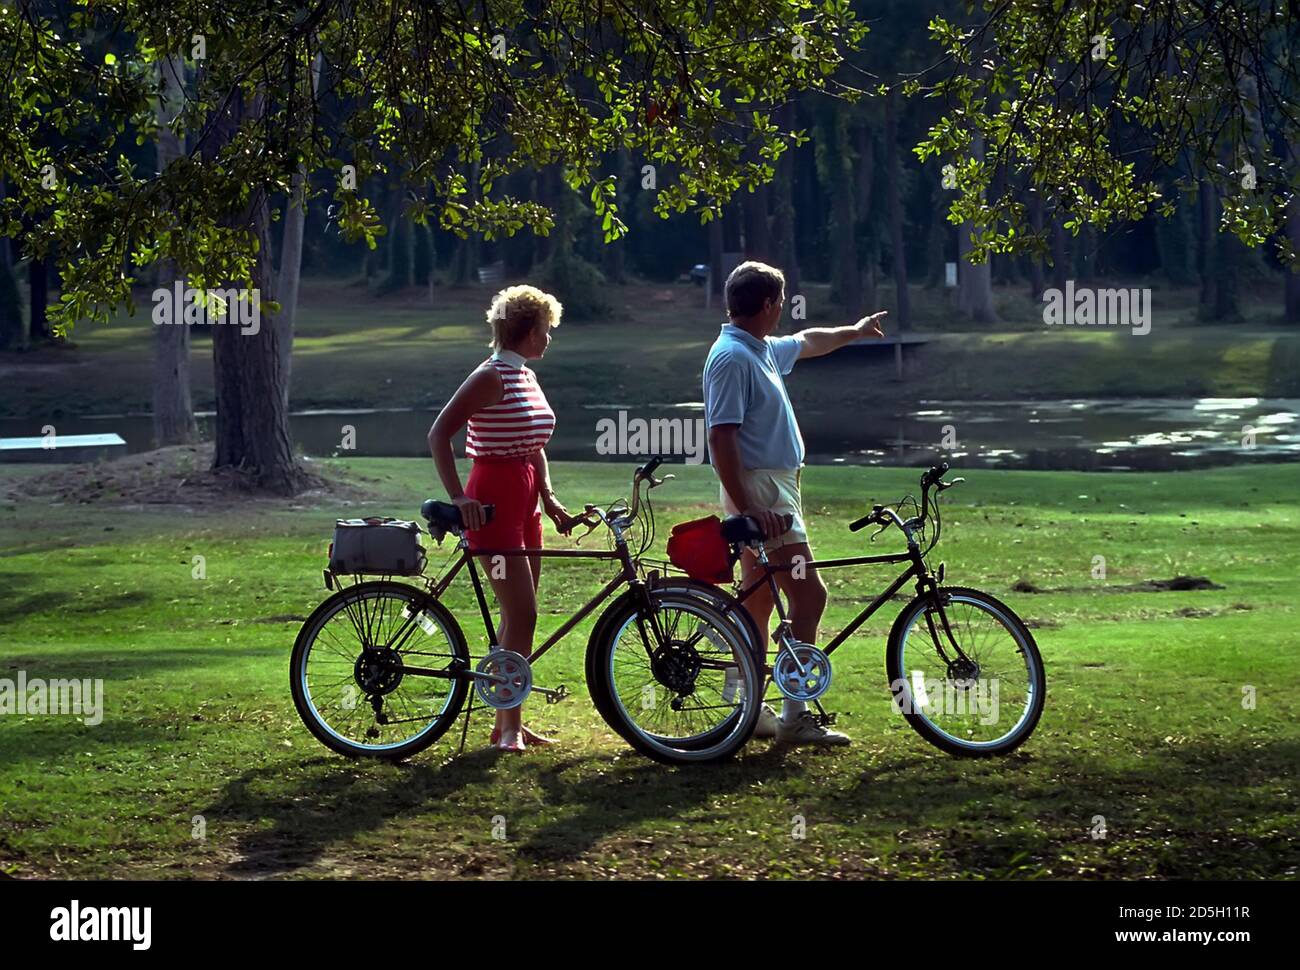 Adult male and female with bicycles ride for exercise and pleasure Stock Photo